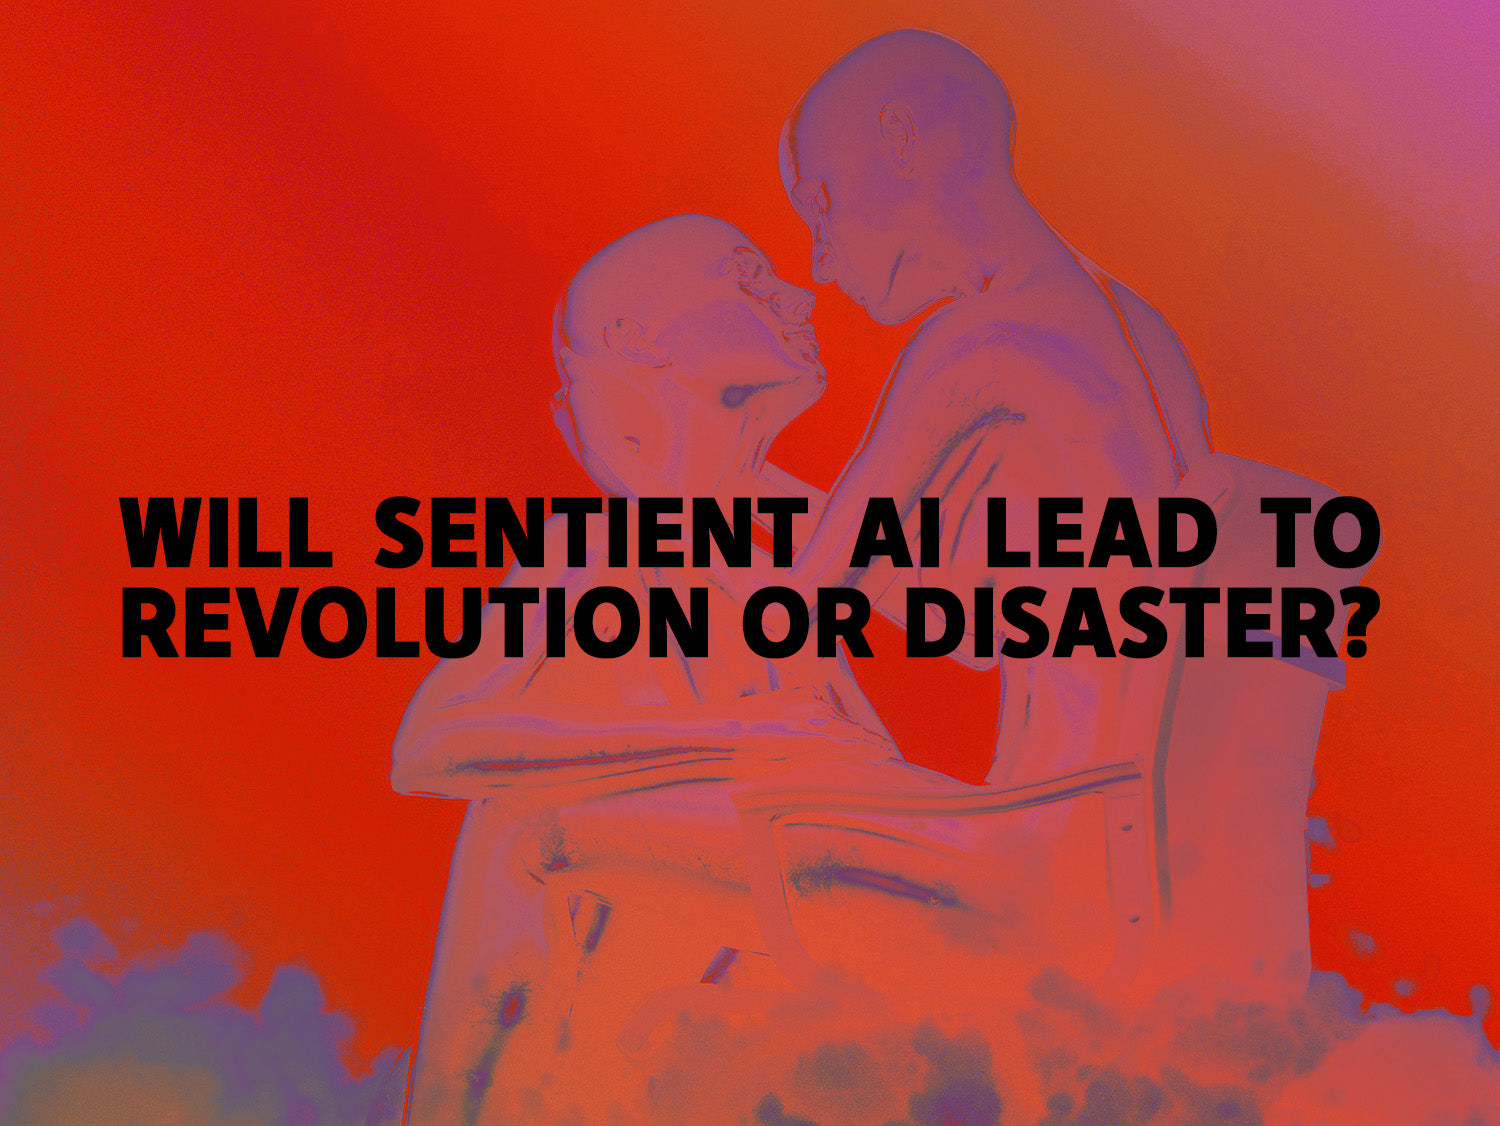 Will Sentient AI lead to Revolution or Disaster?